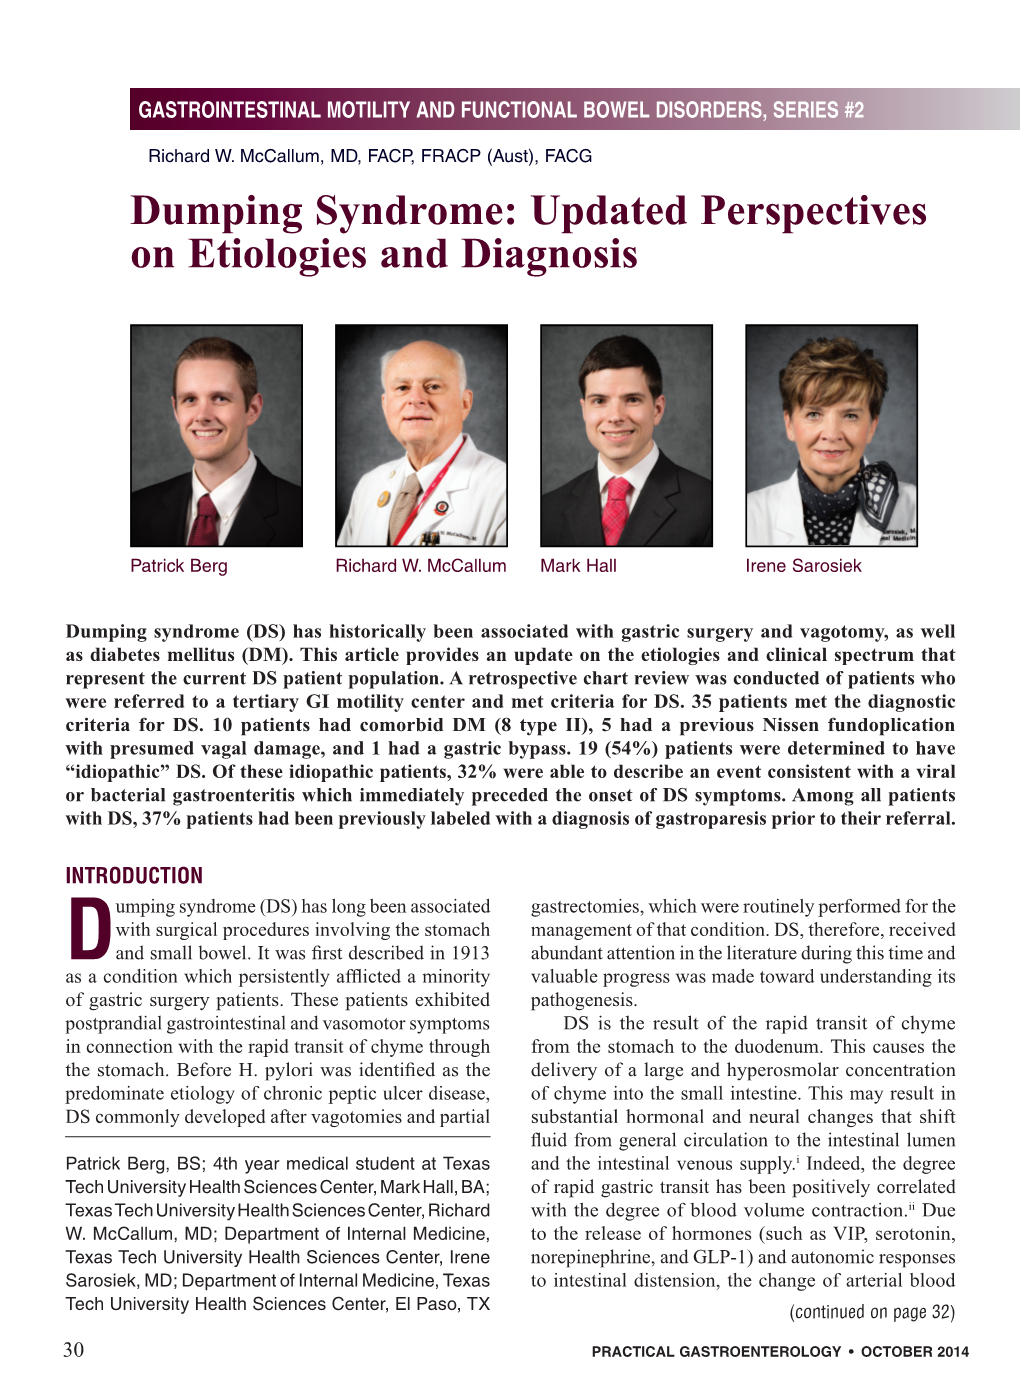 Dumping Syndrome: Updated Perspectives on Etiologies and Diagnosis